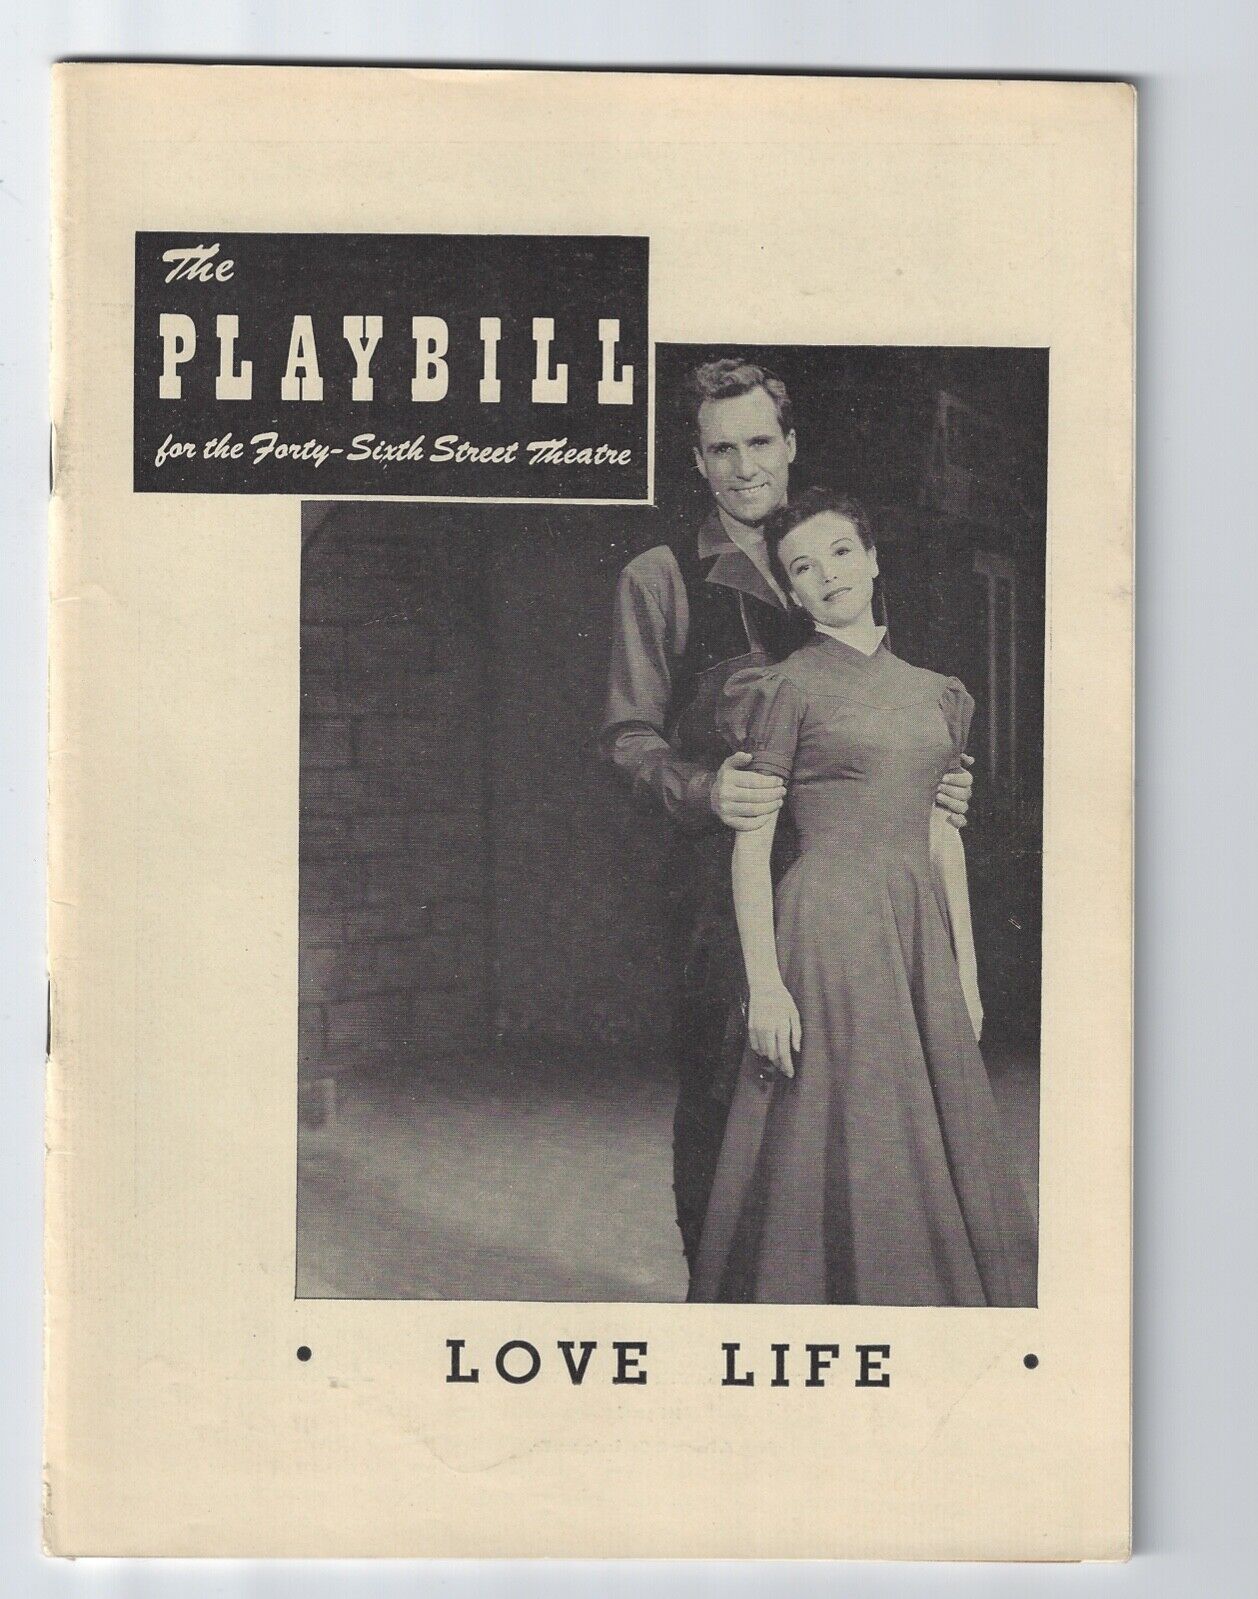 Original Playbill 1948 Love Life Nanette Fabray Forty-sixth Street Theatre